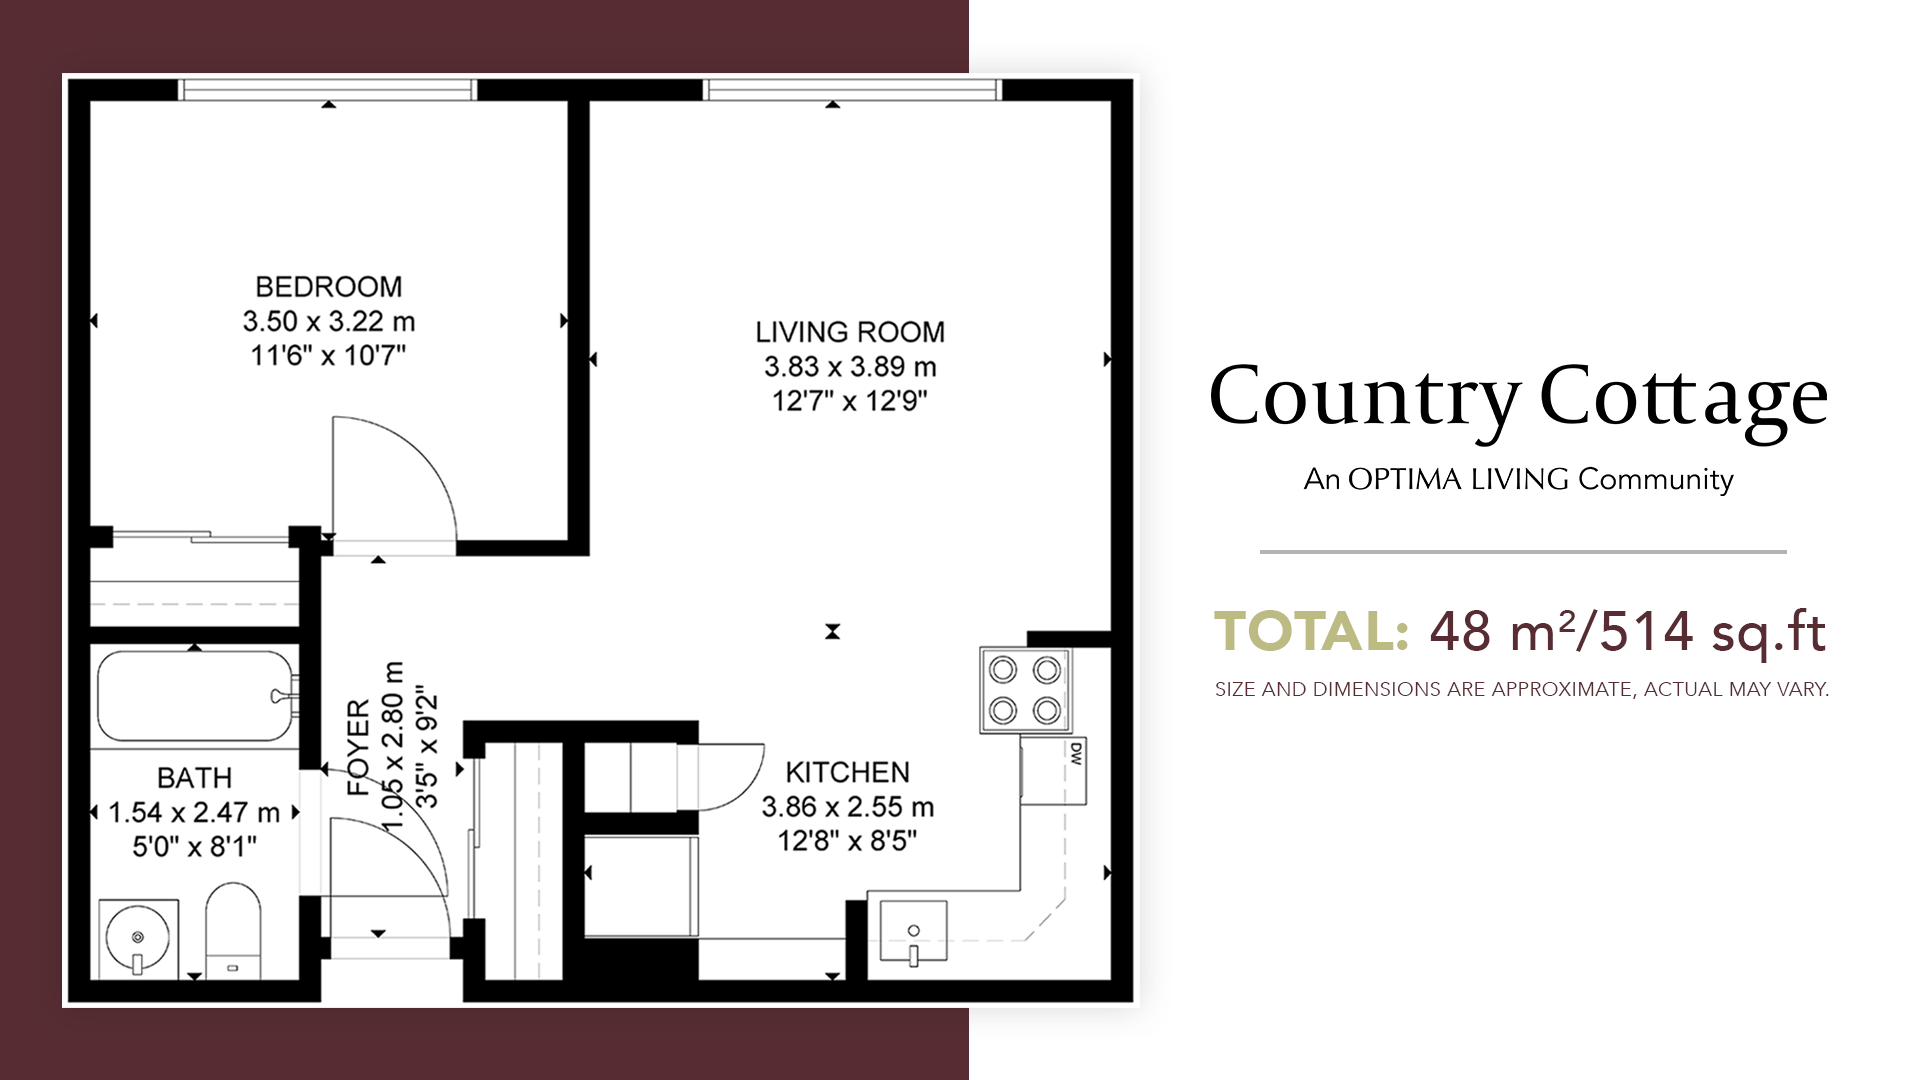 One bedroom suite plan at country cottage residence